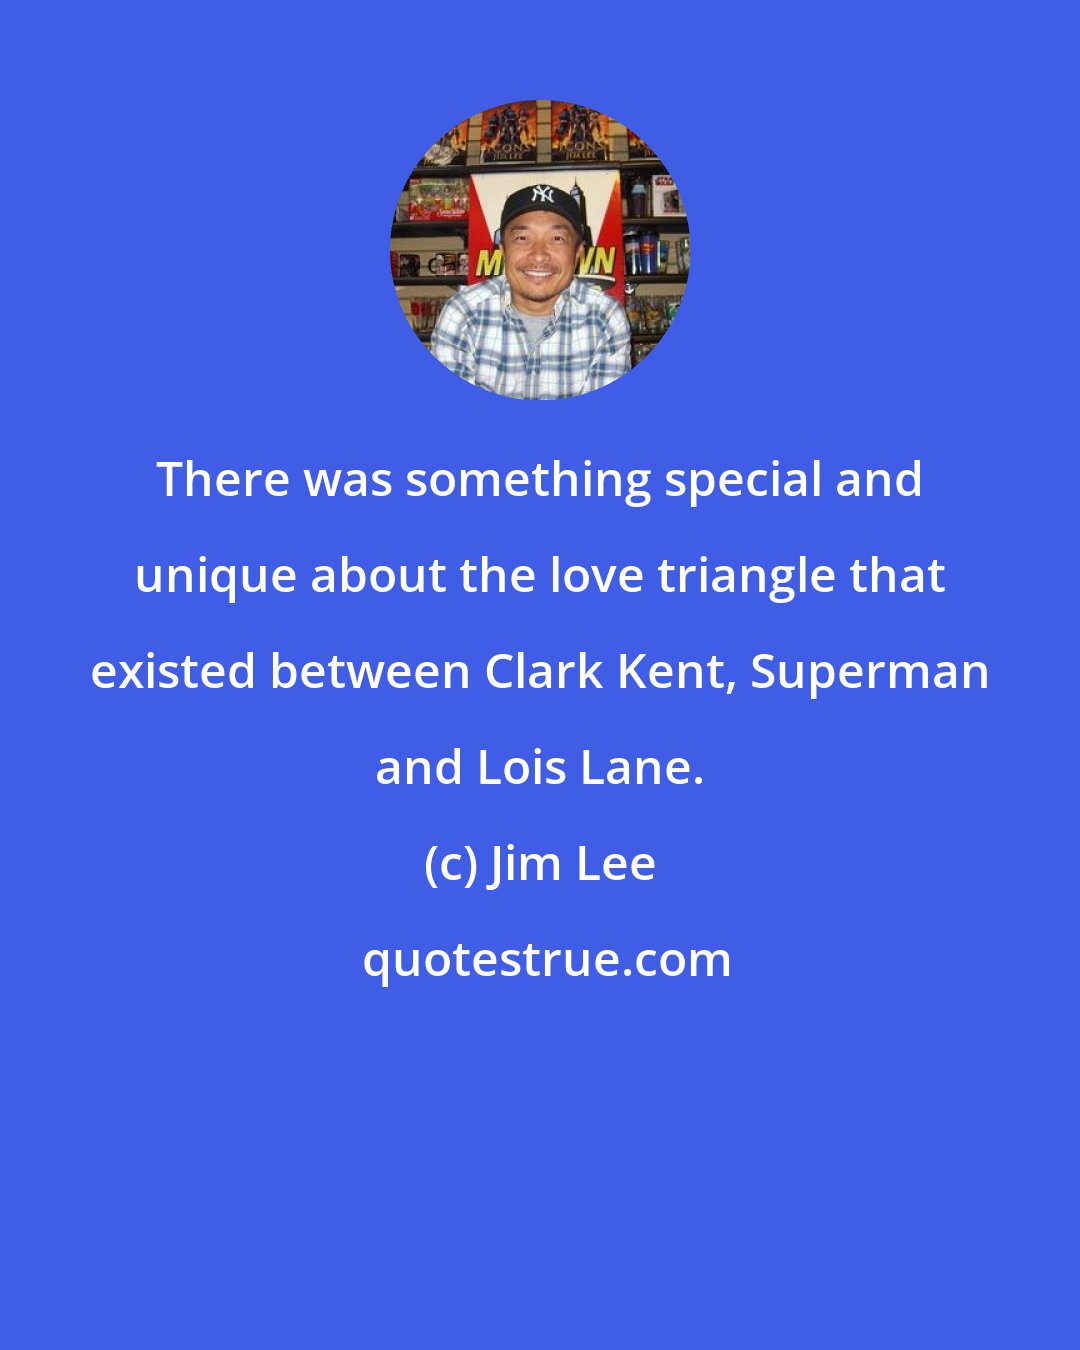 Jim Lee: There was something special and unique about the love triangle that existed between Clark Kent, Superman and Lois Lane.